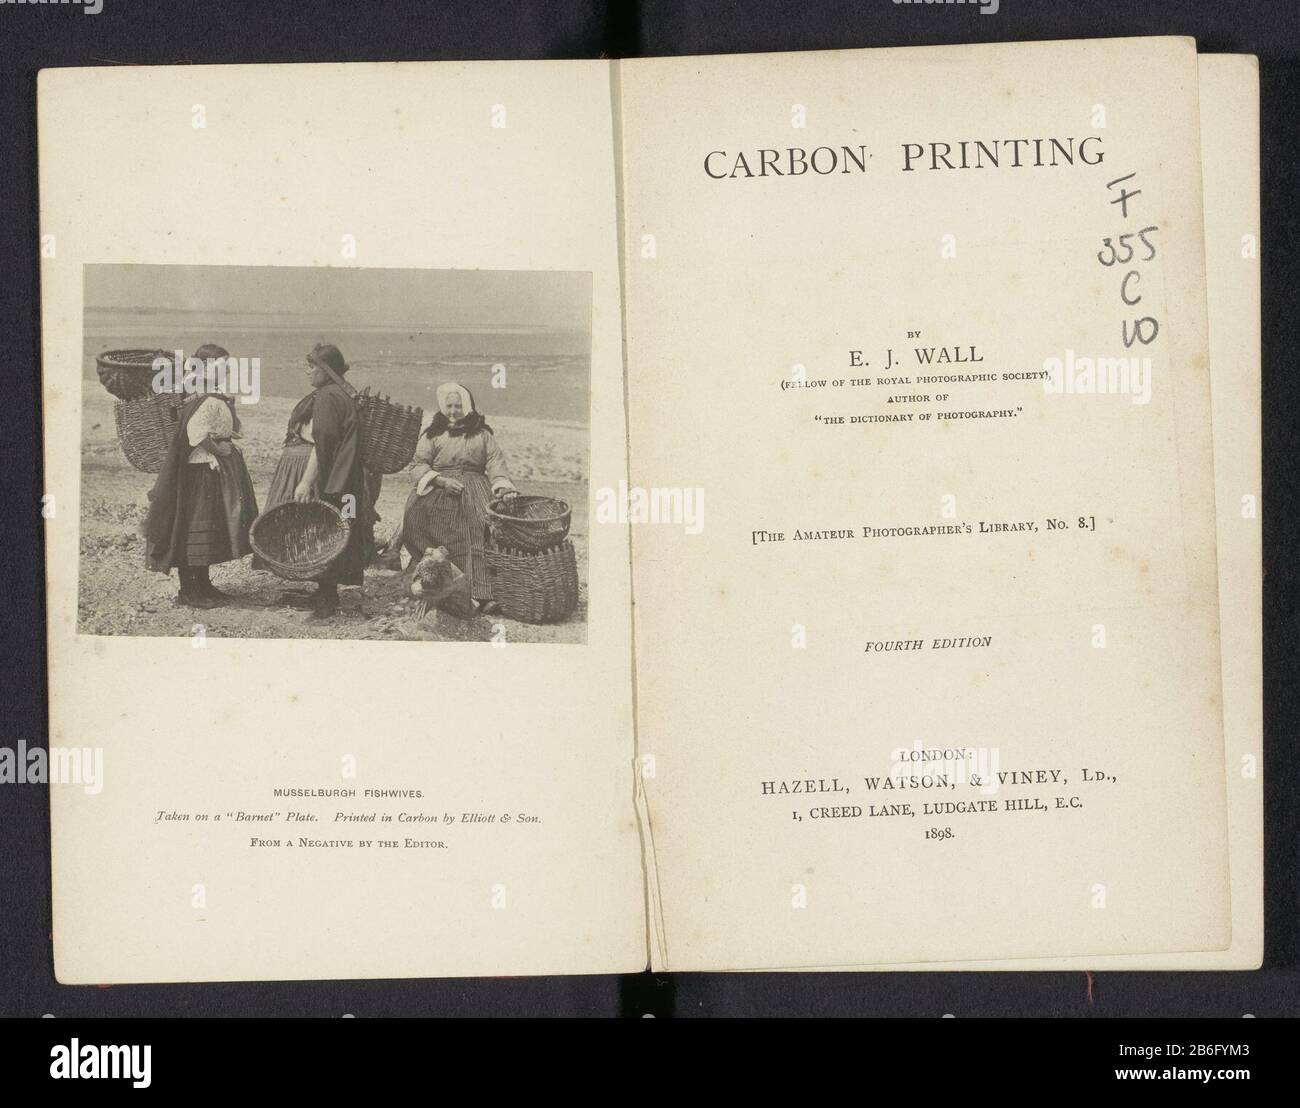 Carbon printing (titel op object) Carbon printing Carbon printing (title object) Carbon printing object type: book Object number: RP-F-2001-7-446Vervaardiging Dating: 1898 Material: paper carton linen paper Technique: autotype / print / carbon printing dimensions: Book: h 180 mm × b 120 mm × d 10 mm Stock Photo